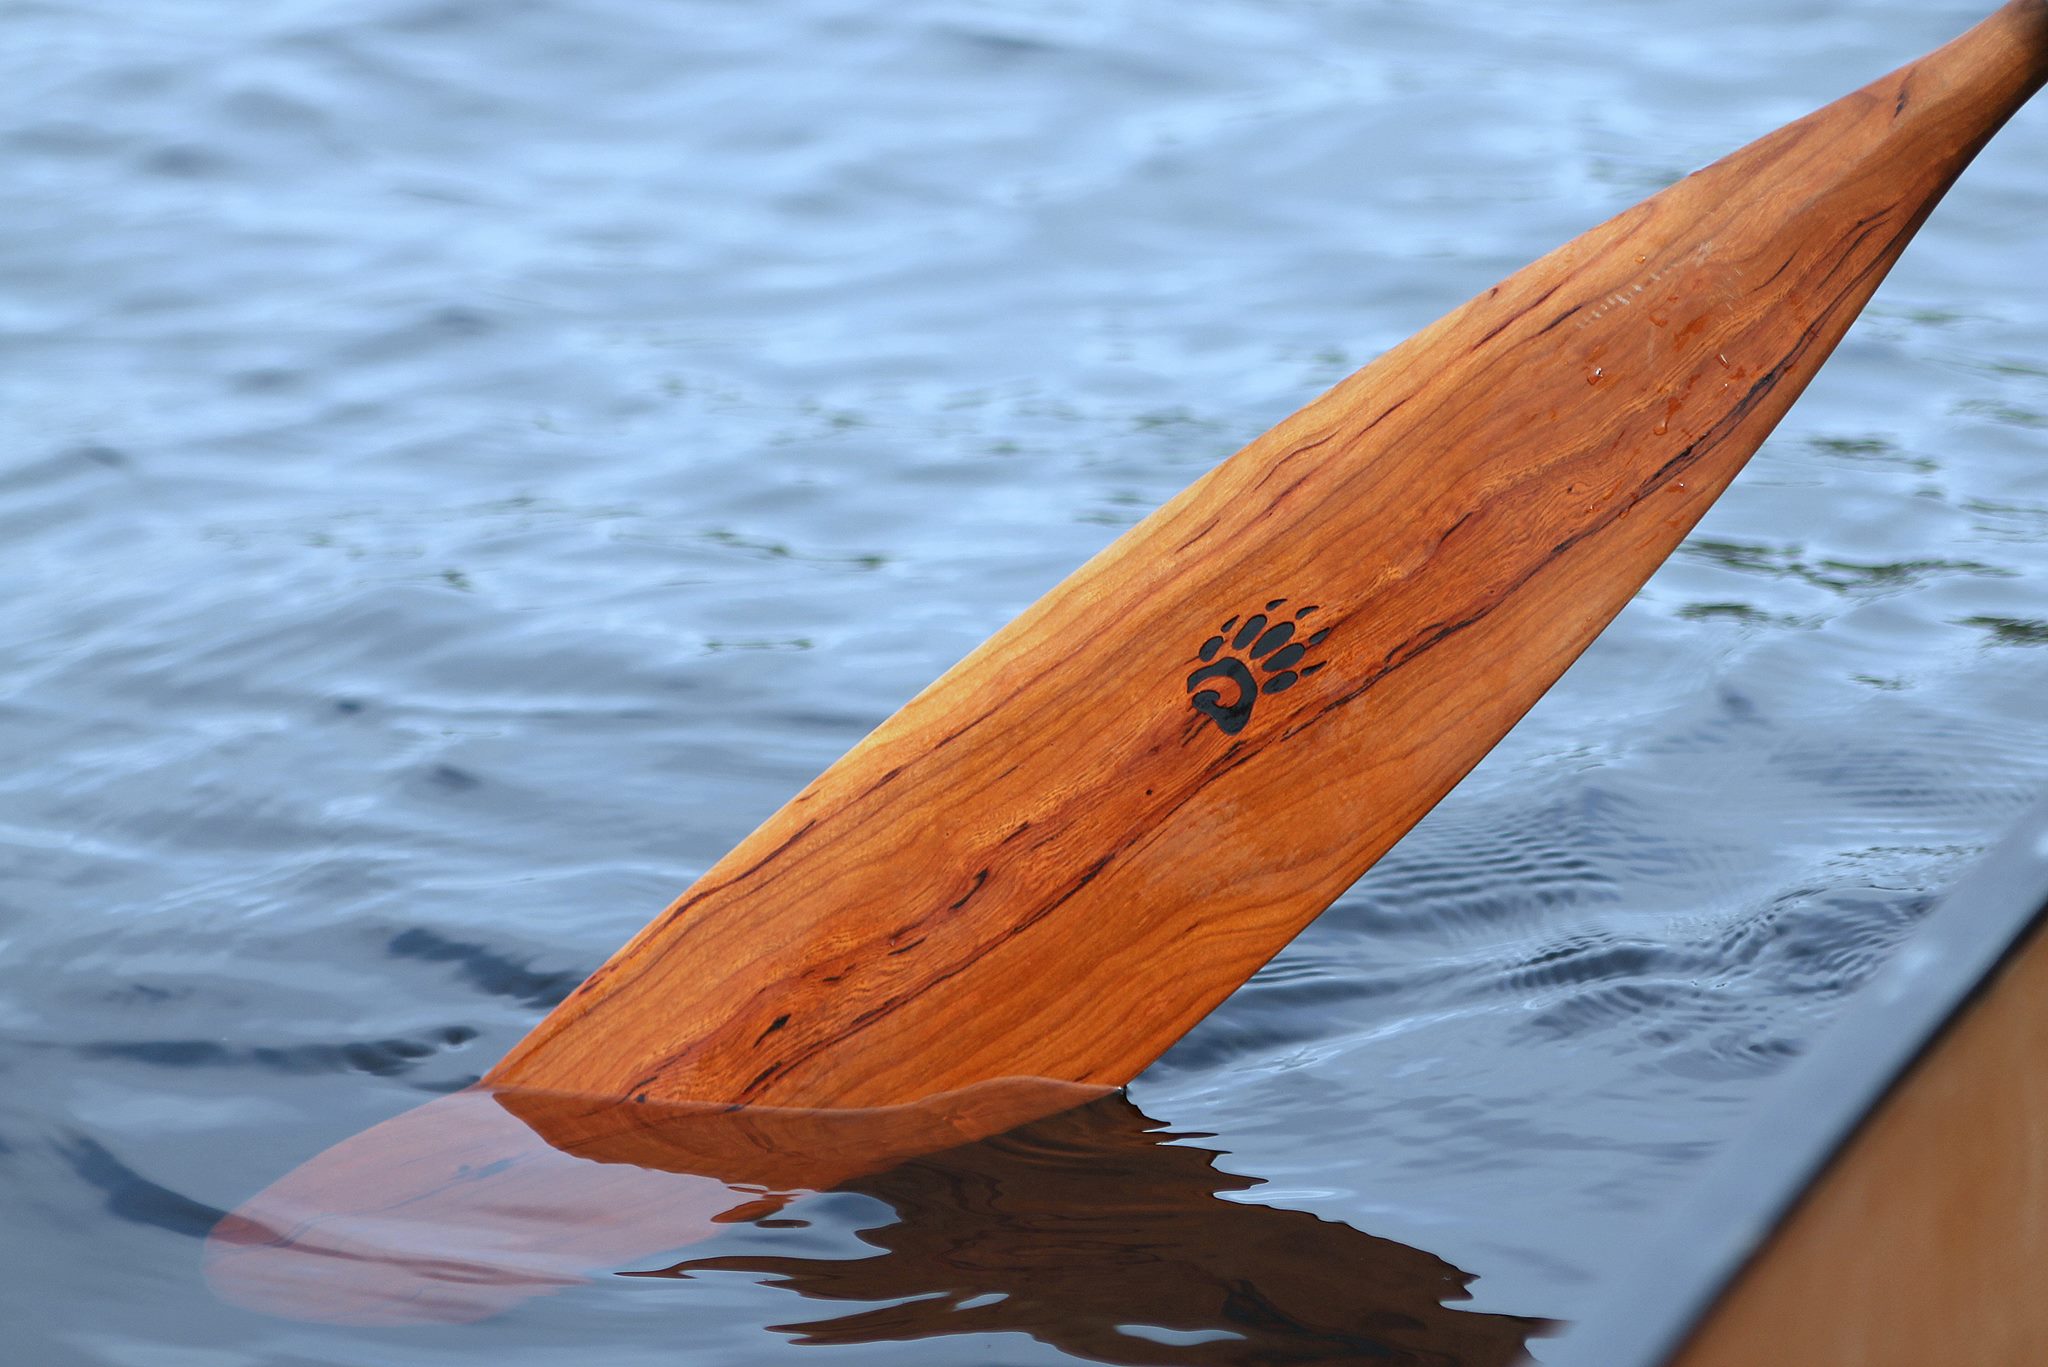 Paddle dipping in the water beside canoe.